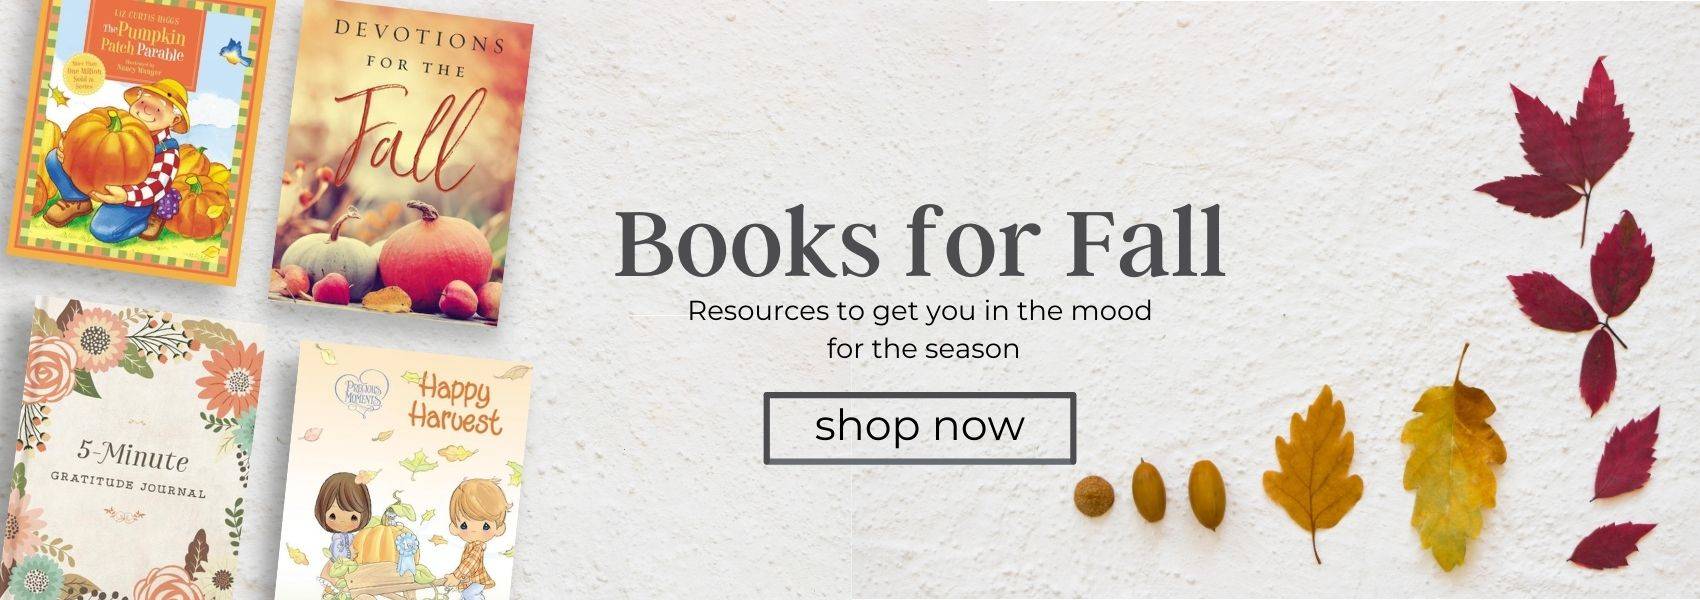 Books for Fall